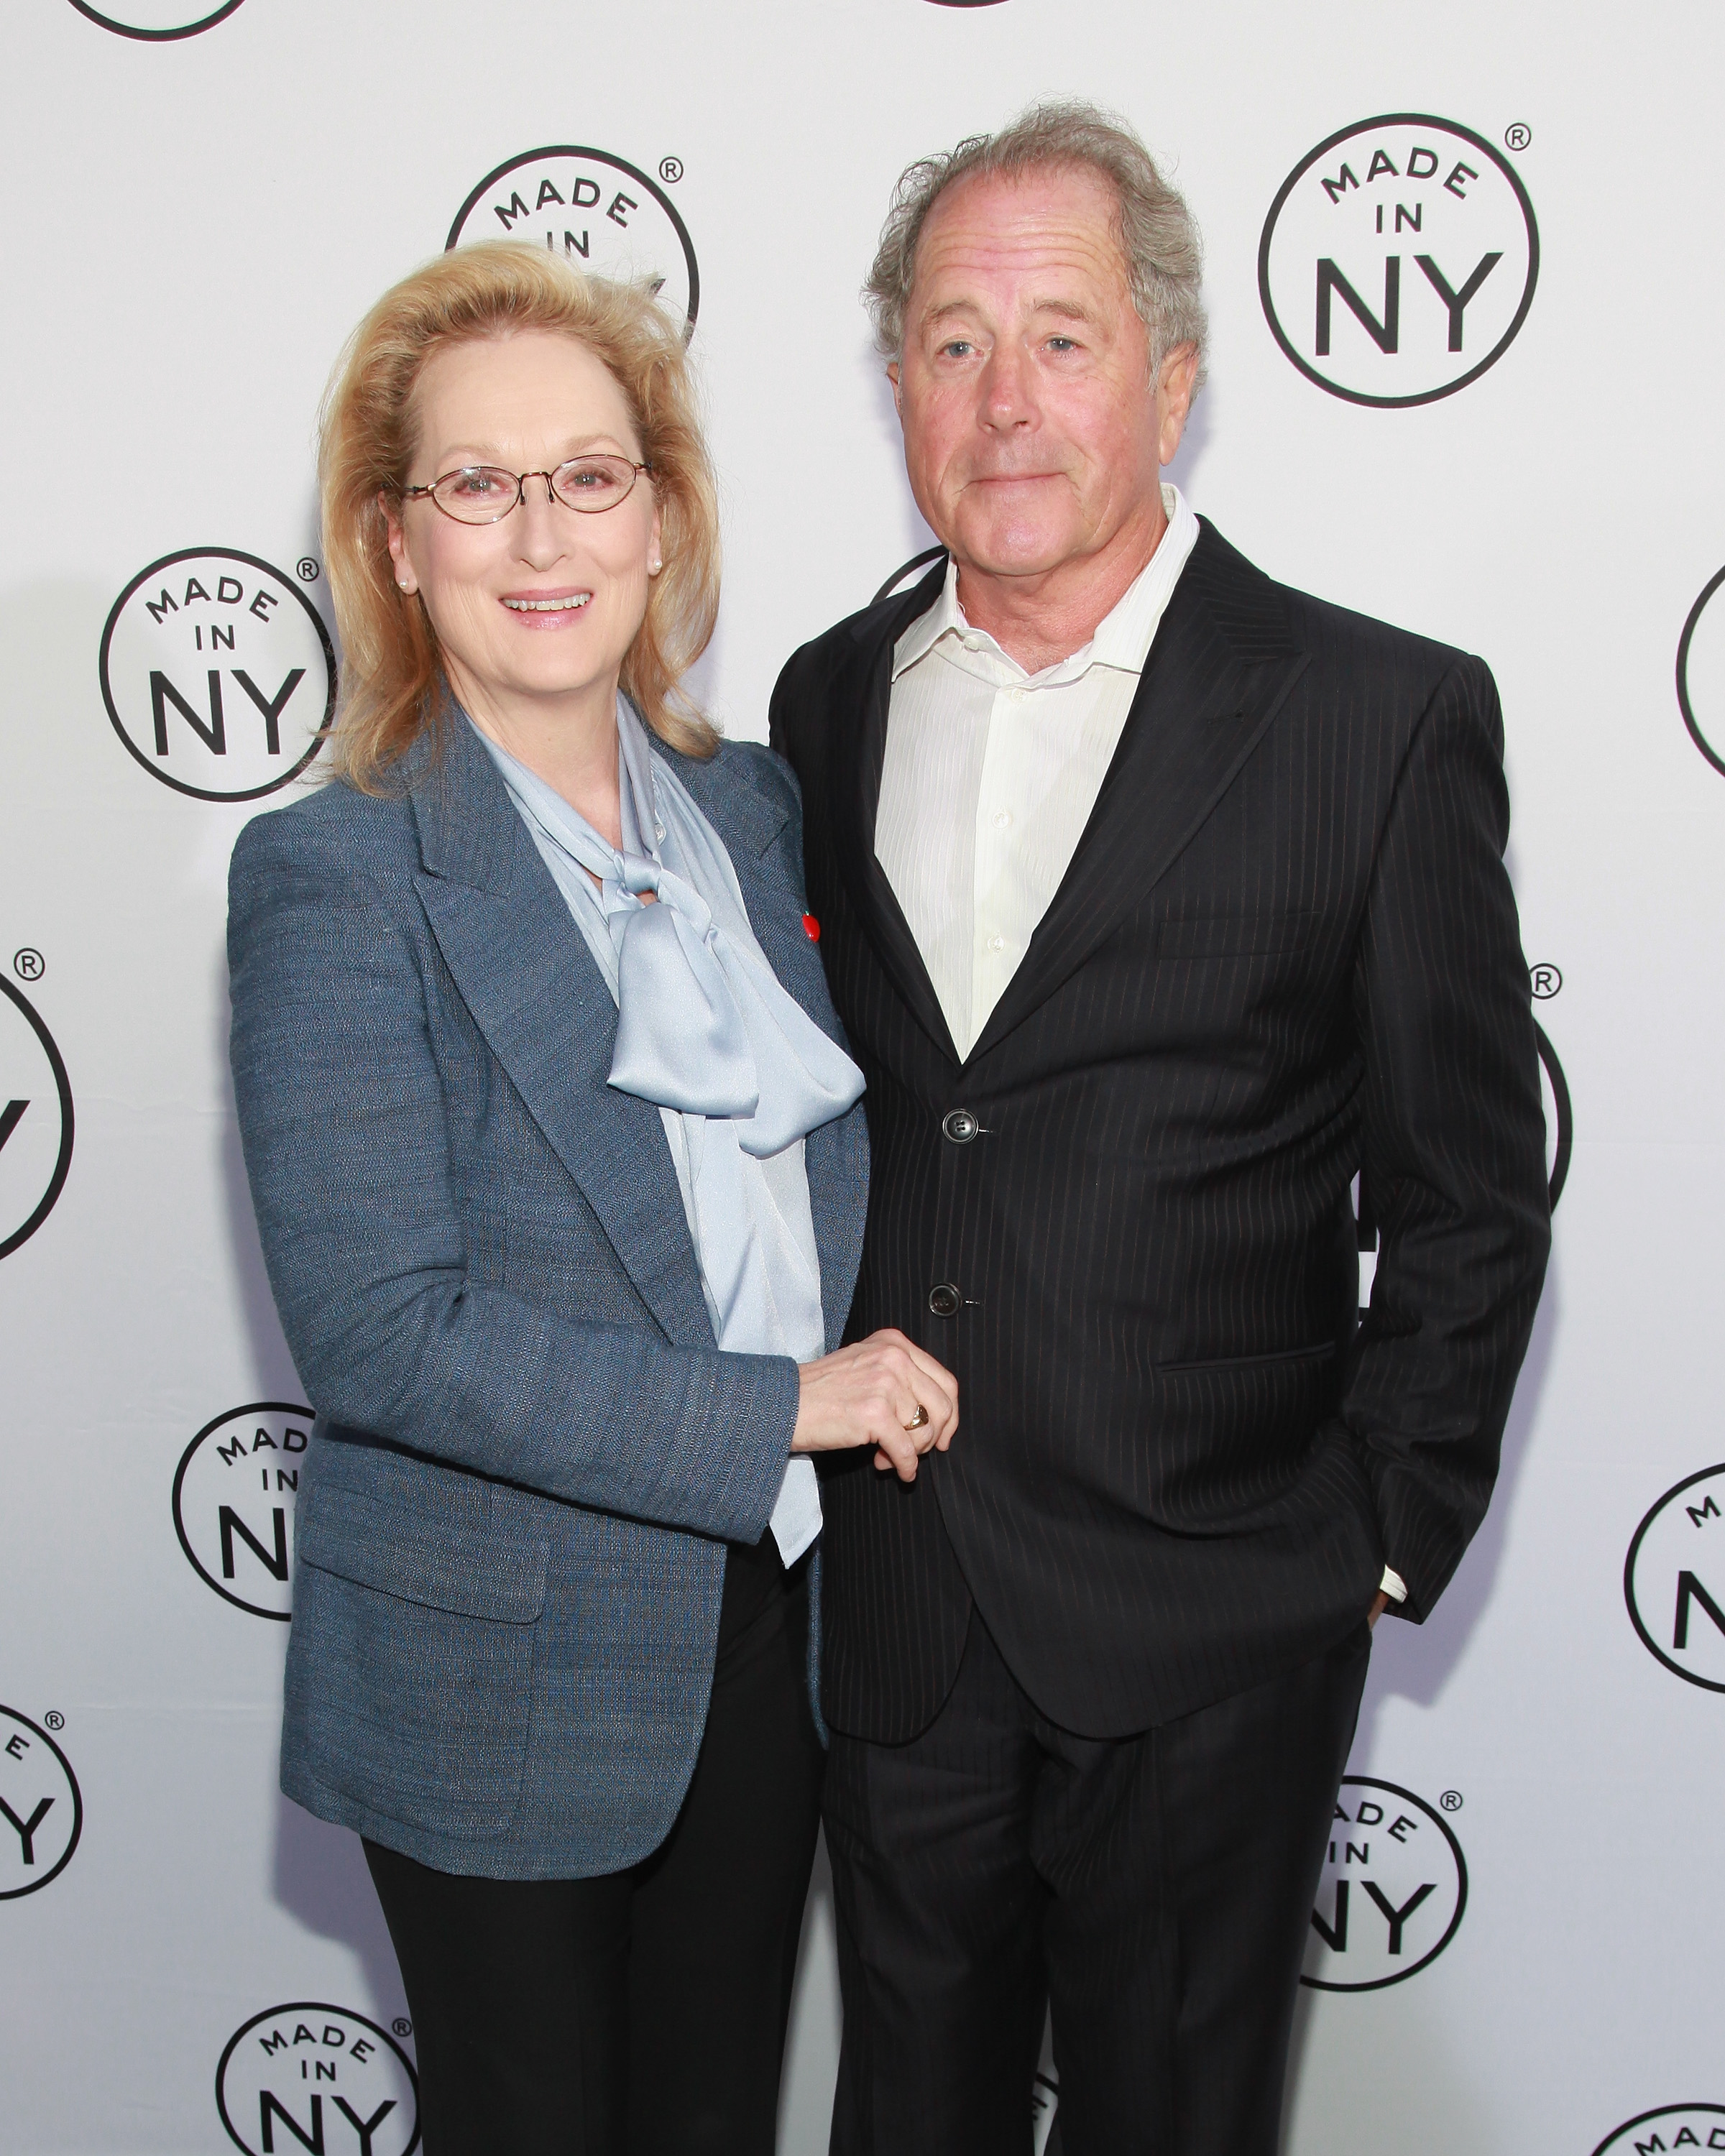 Meryl Streep and Don Gummer at the 2012 Made In NY Awards at Gracie Mansion in New York City on June 4, 2012 | Source: Getty Images